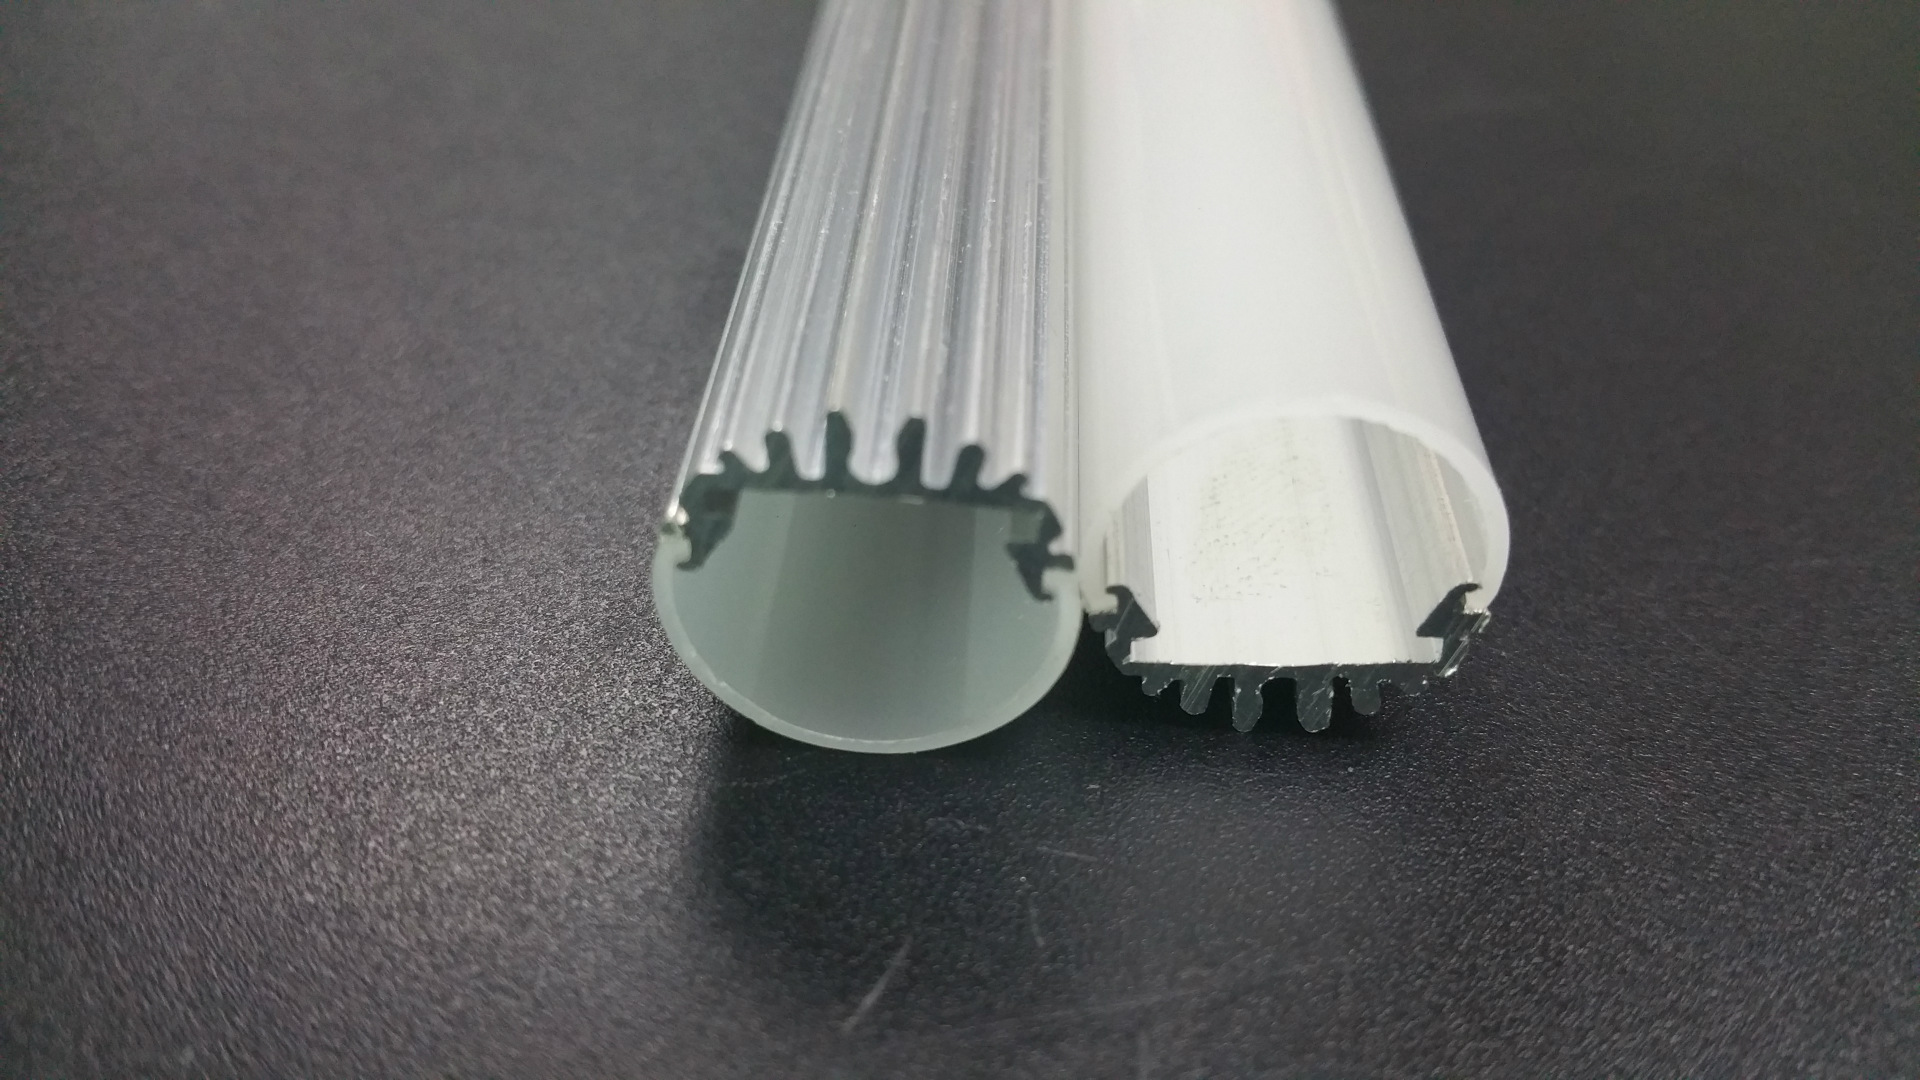 The prospect of LED linear lights